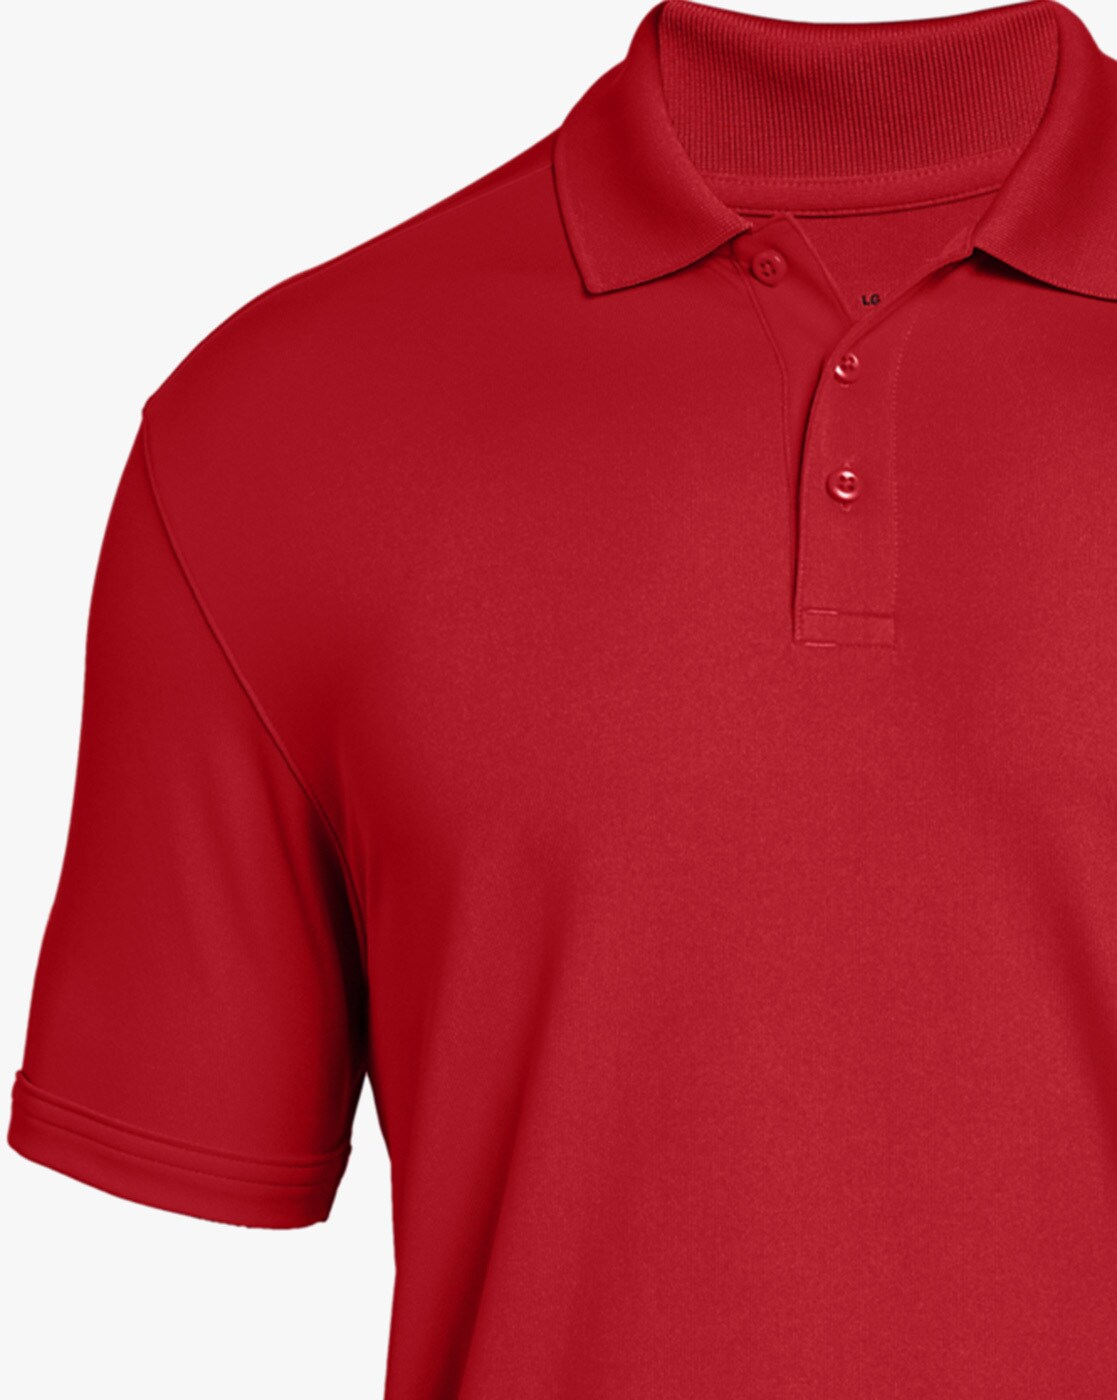 Buy Red Tshirts for Men by Under Armour Online